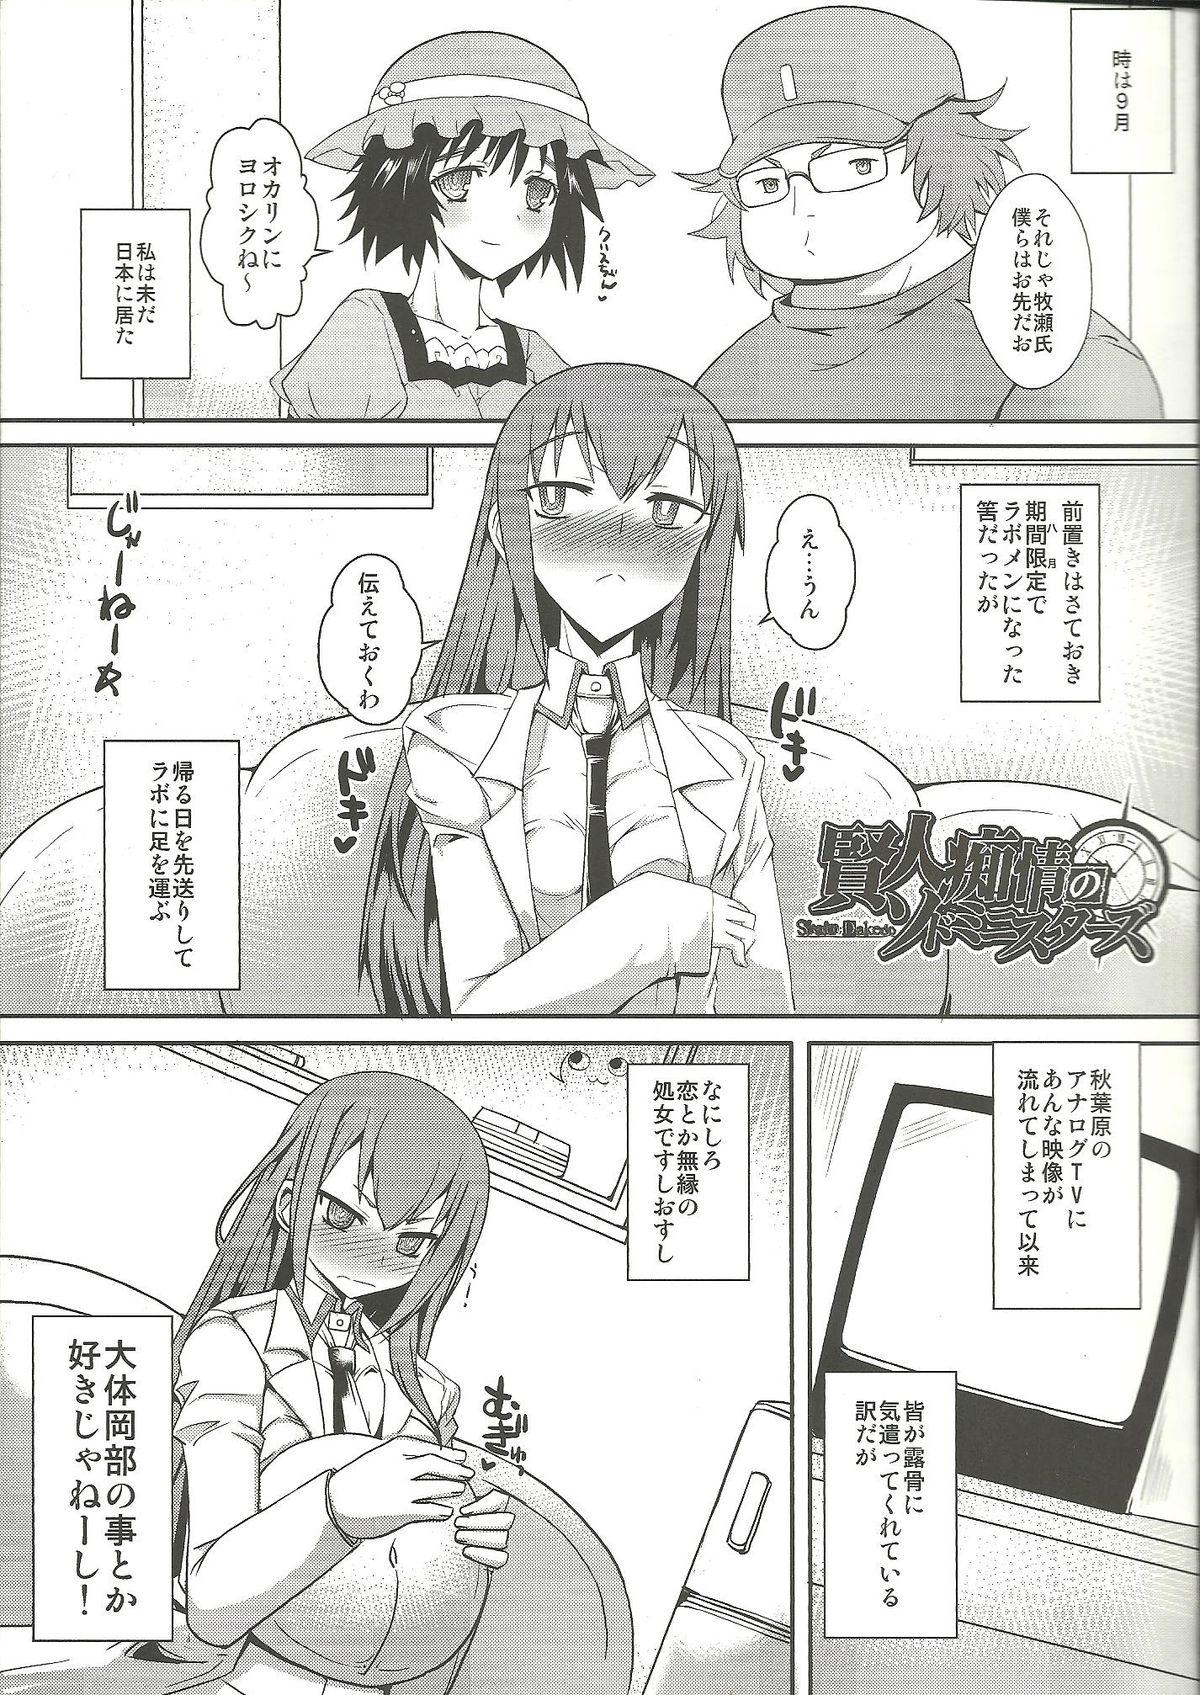 Lesbiansex Kenjin Chijou no Sodoministers - Steinsgate Pain - Page 4